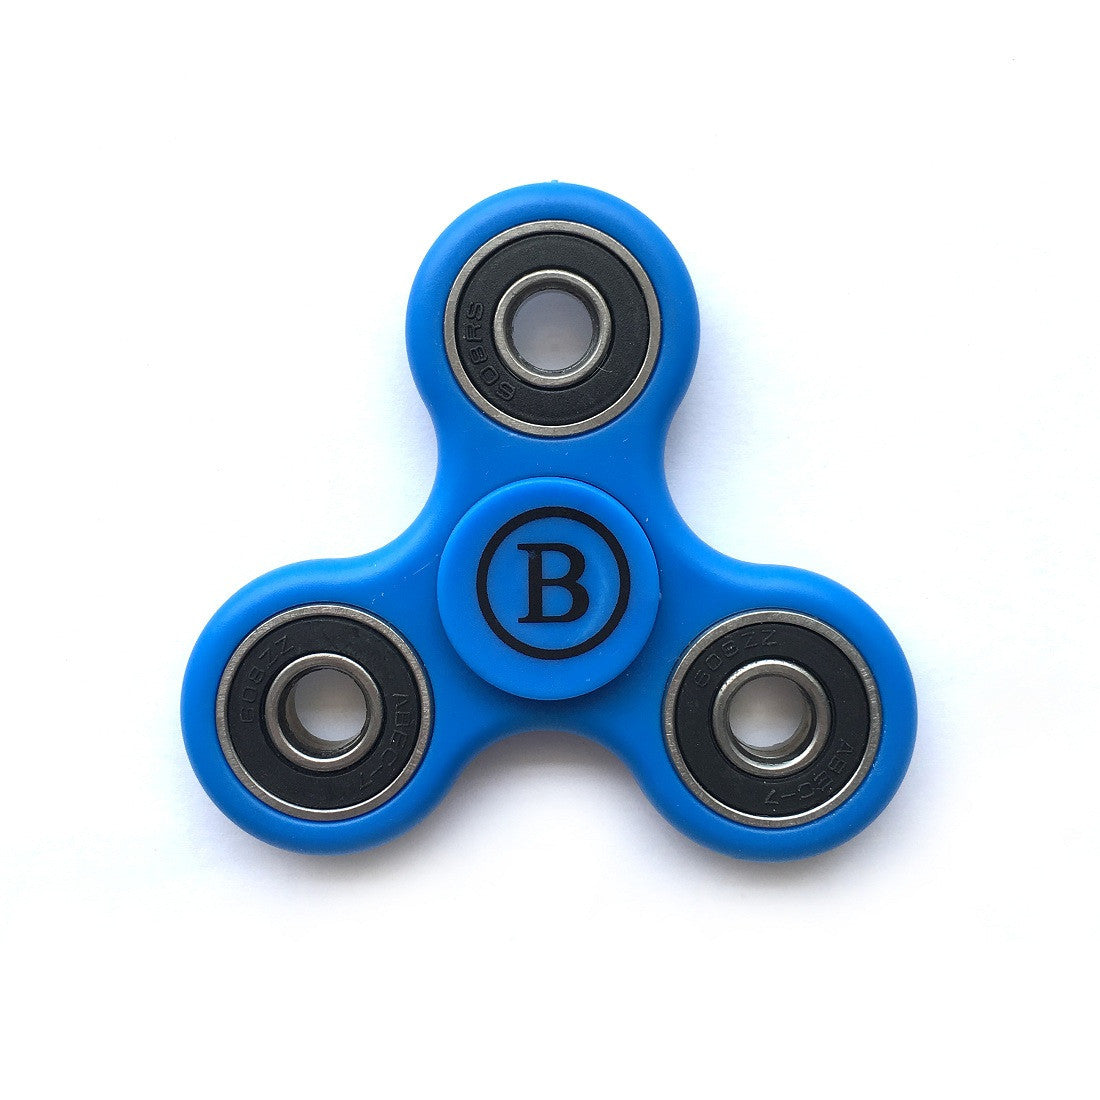 Fidget Hand Spinner High Speed Steel Bearing, Adhd Focus Anxiety Relief Toy - Blue